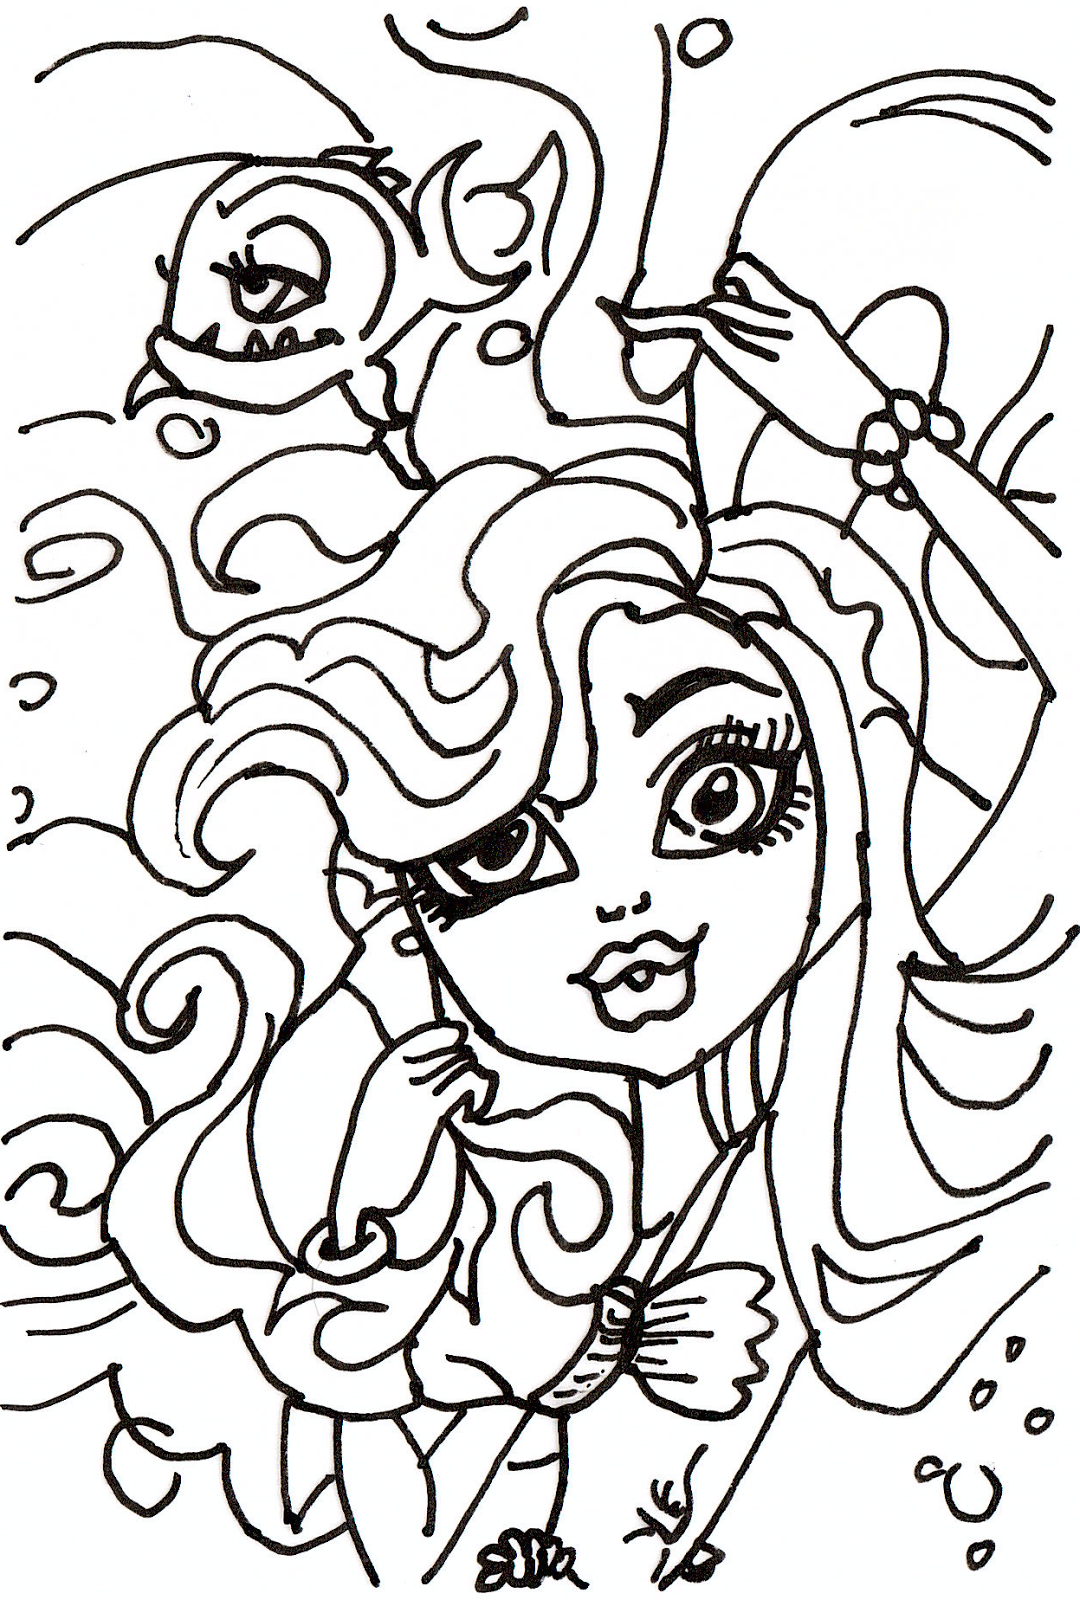 Download Free Printable Monster High Coloring Pages: Lagoona Blue Picture Day Coloring Sheet